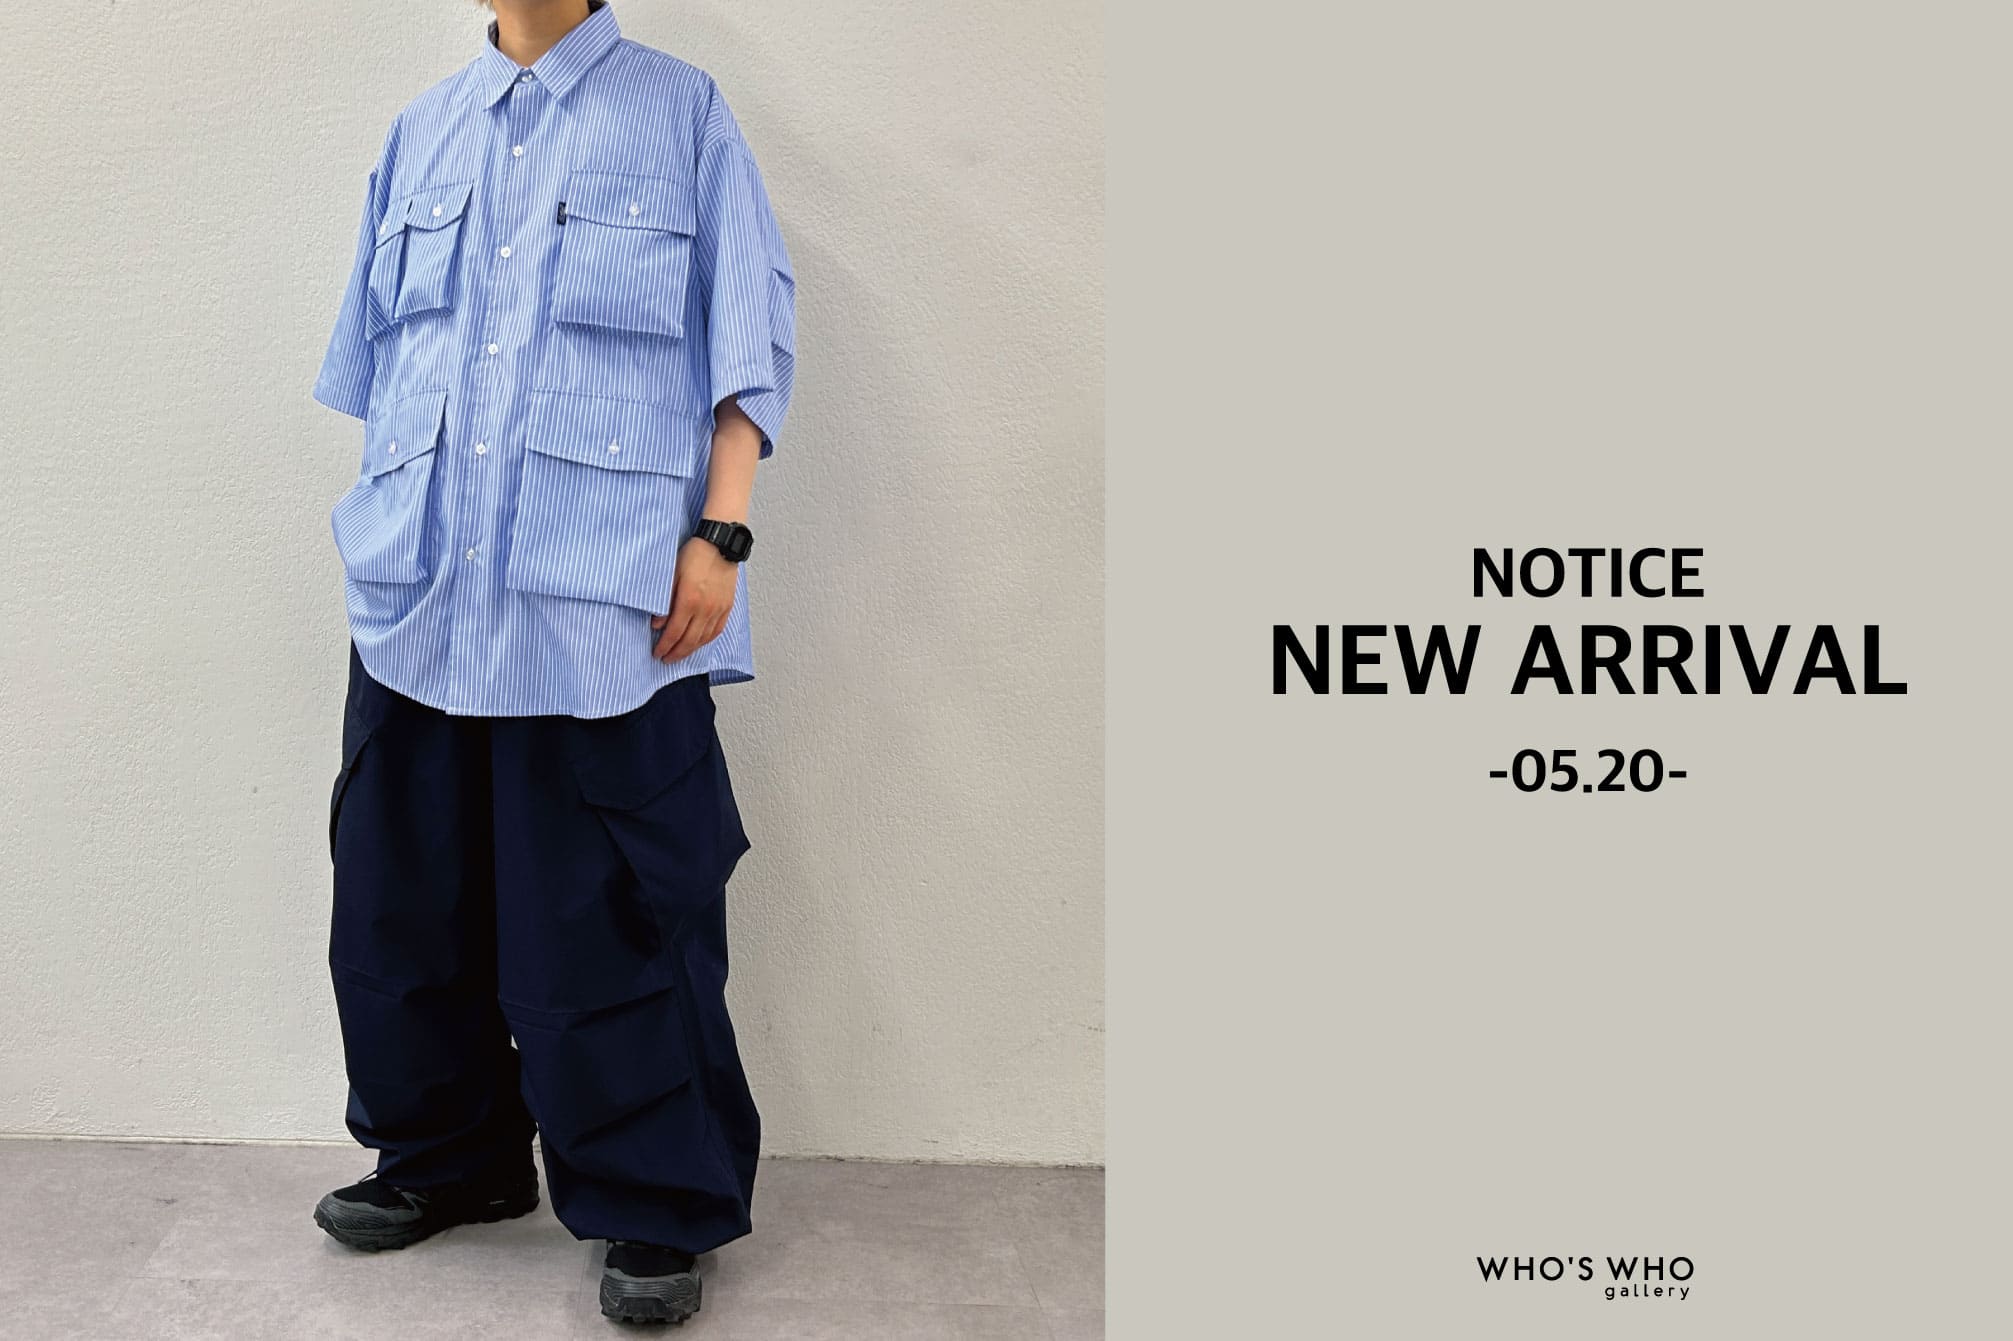 WHO’S WHO gallery 【NEW ARRIVAL NOTICE -05.20-】